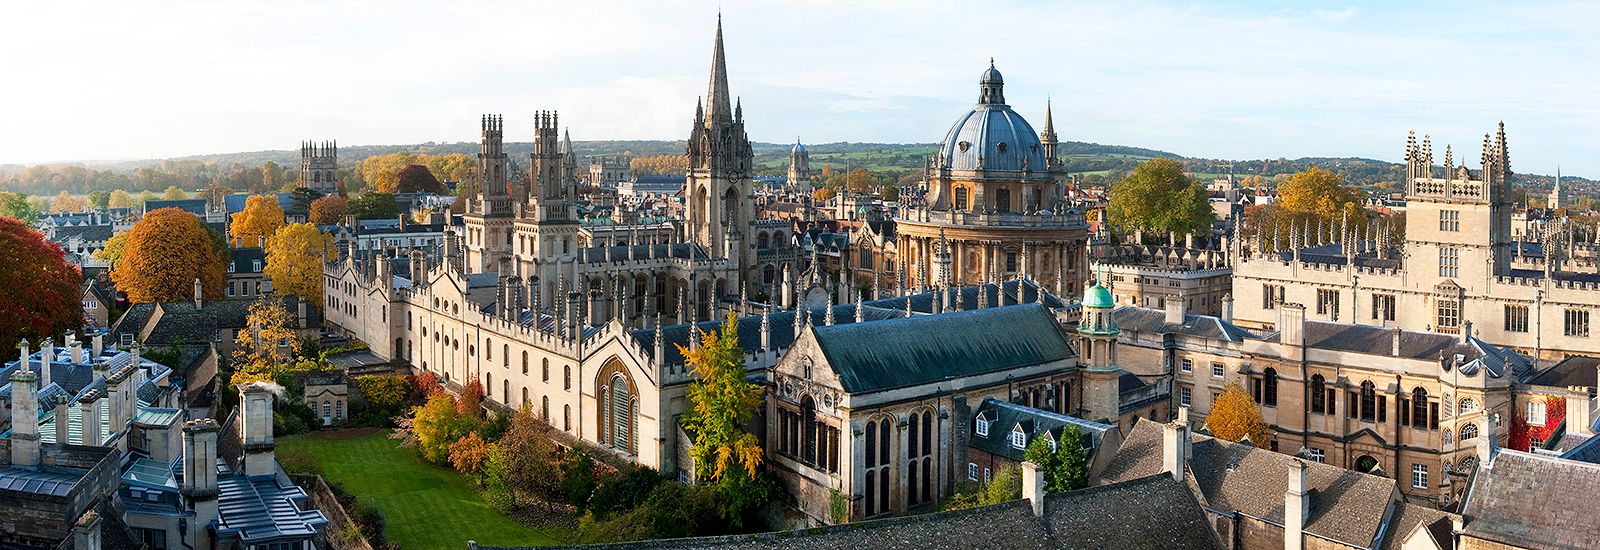 Oxford skyline including Radcliffe Square and the Bodleian